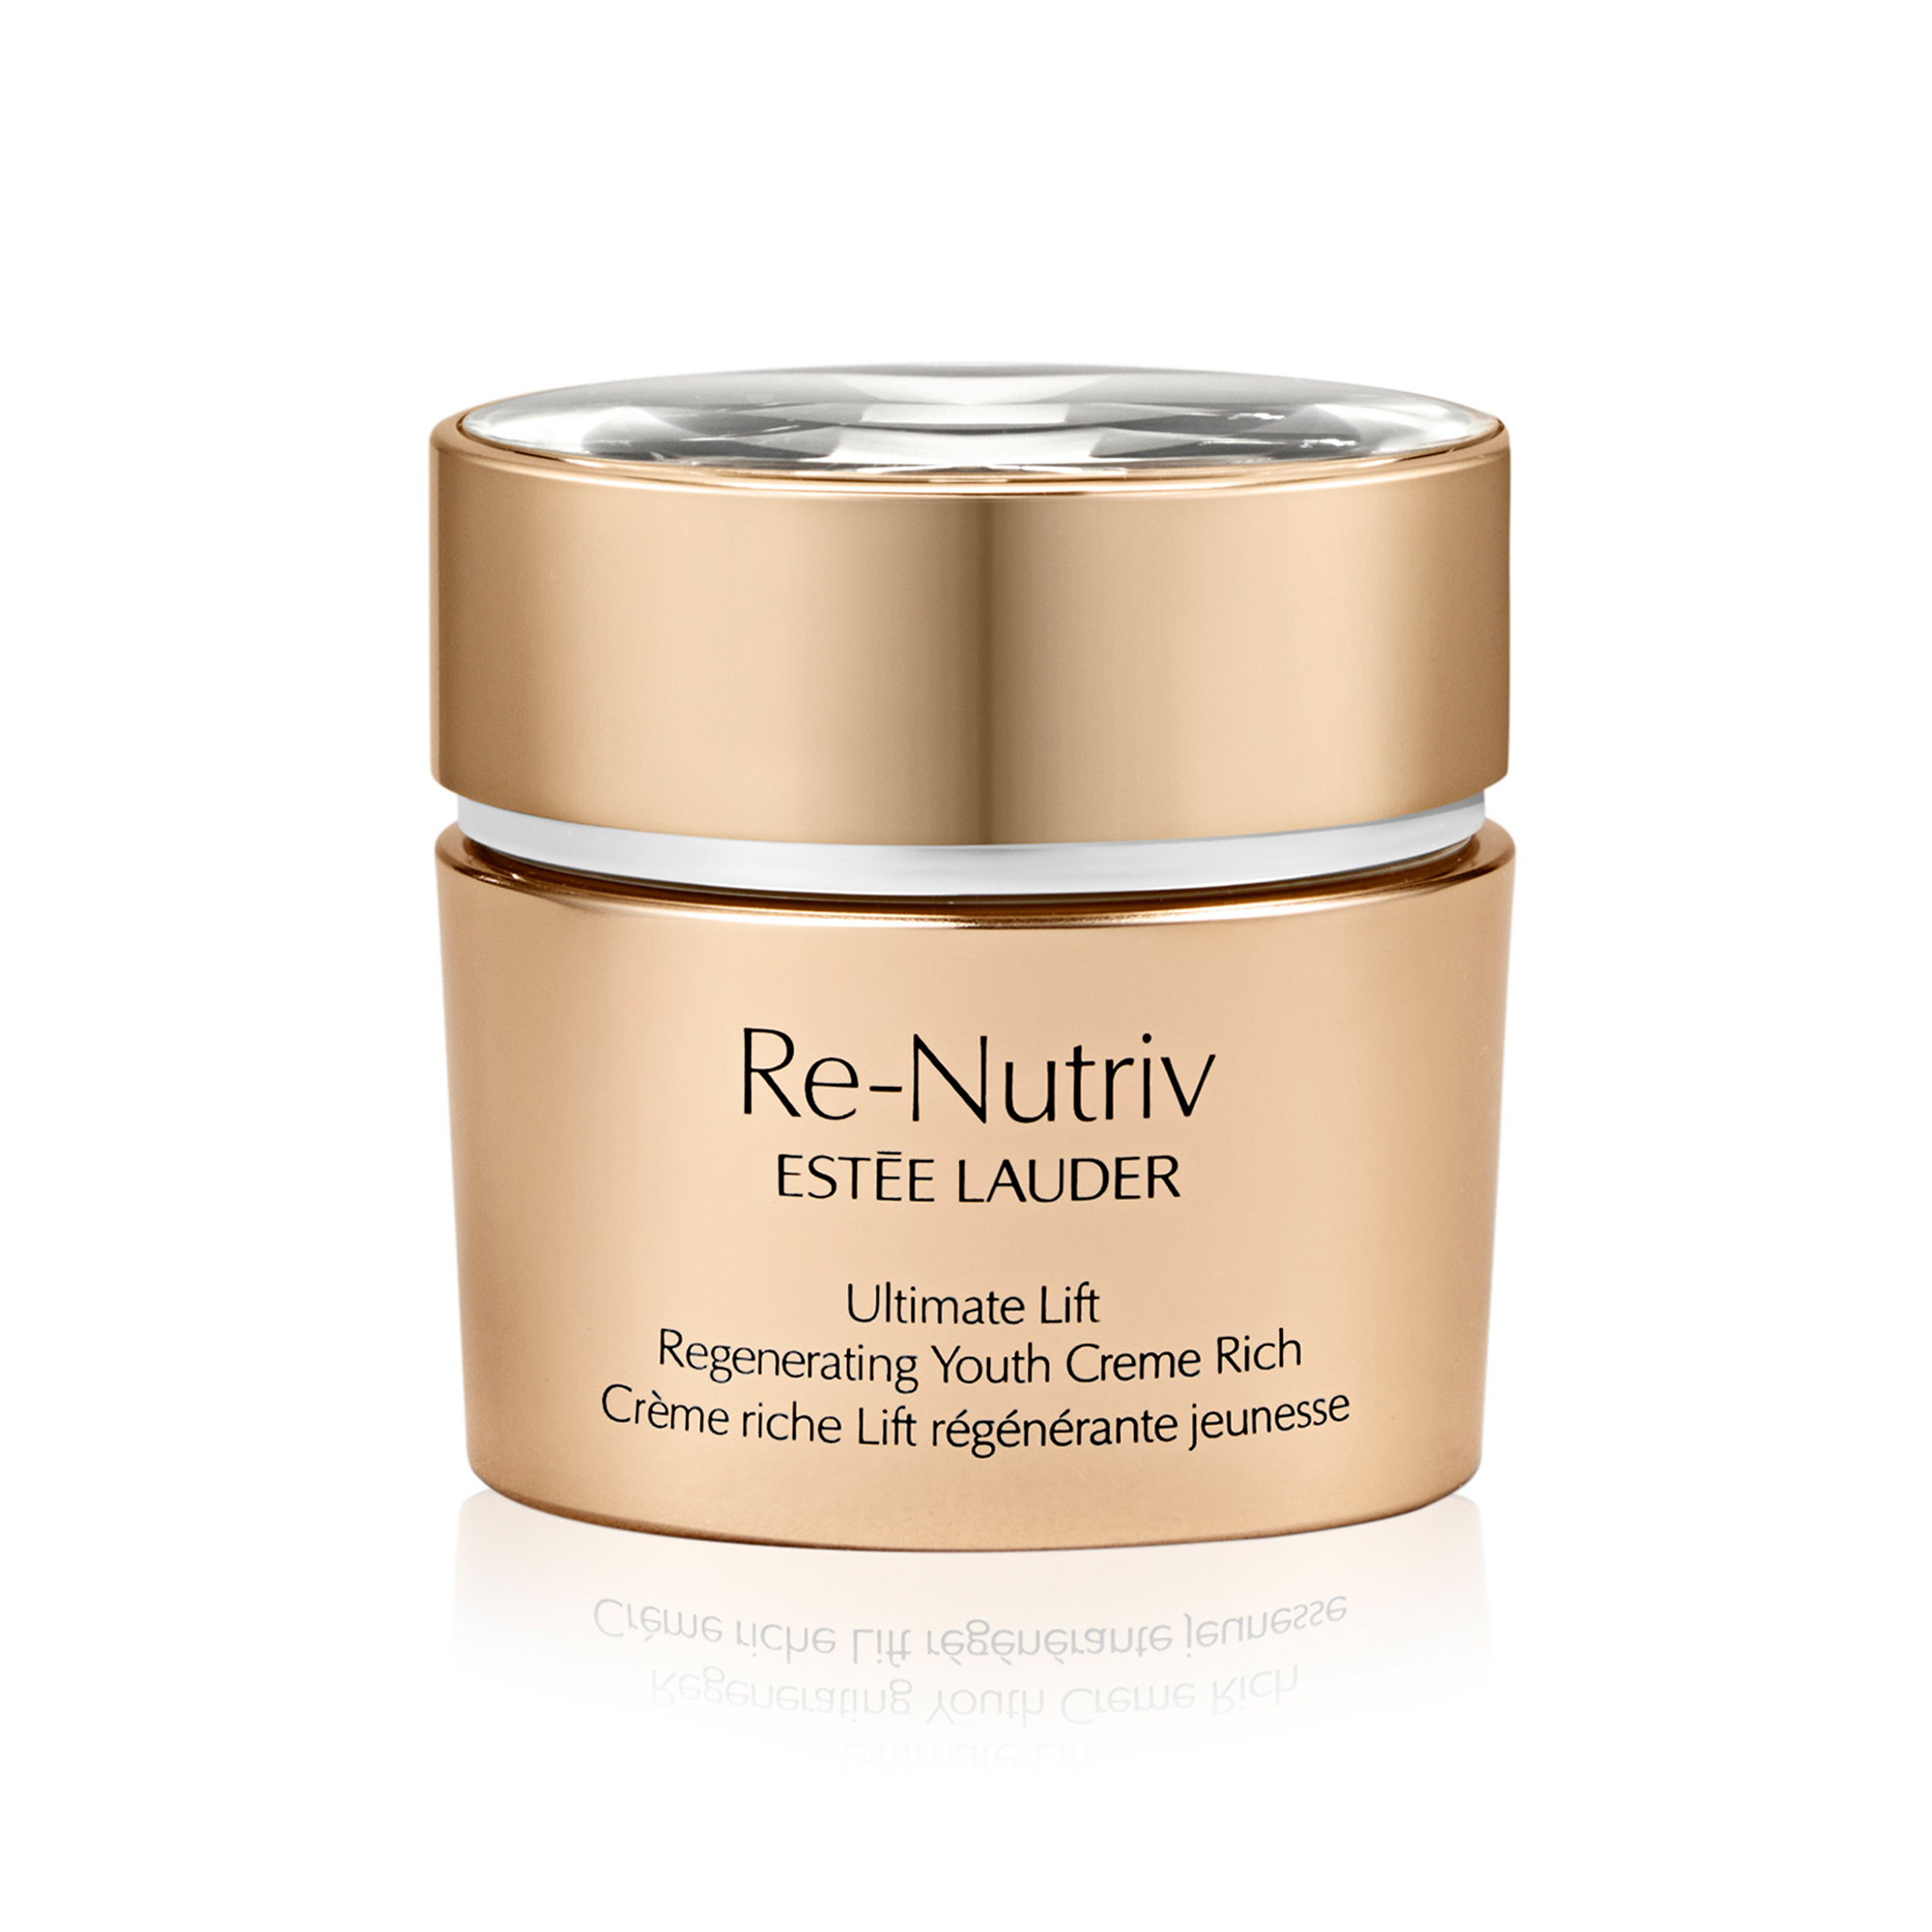  Ultimate Lift Regenerating Youth Creme Rich.